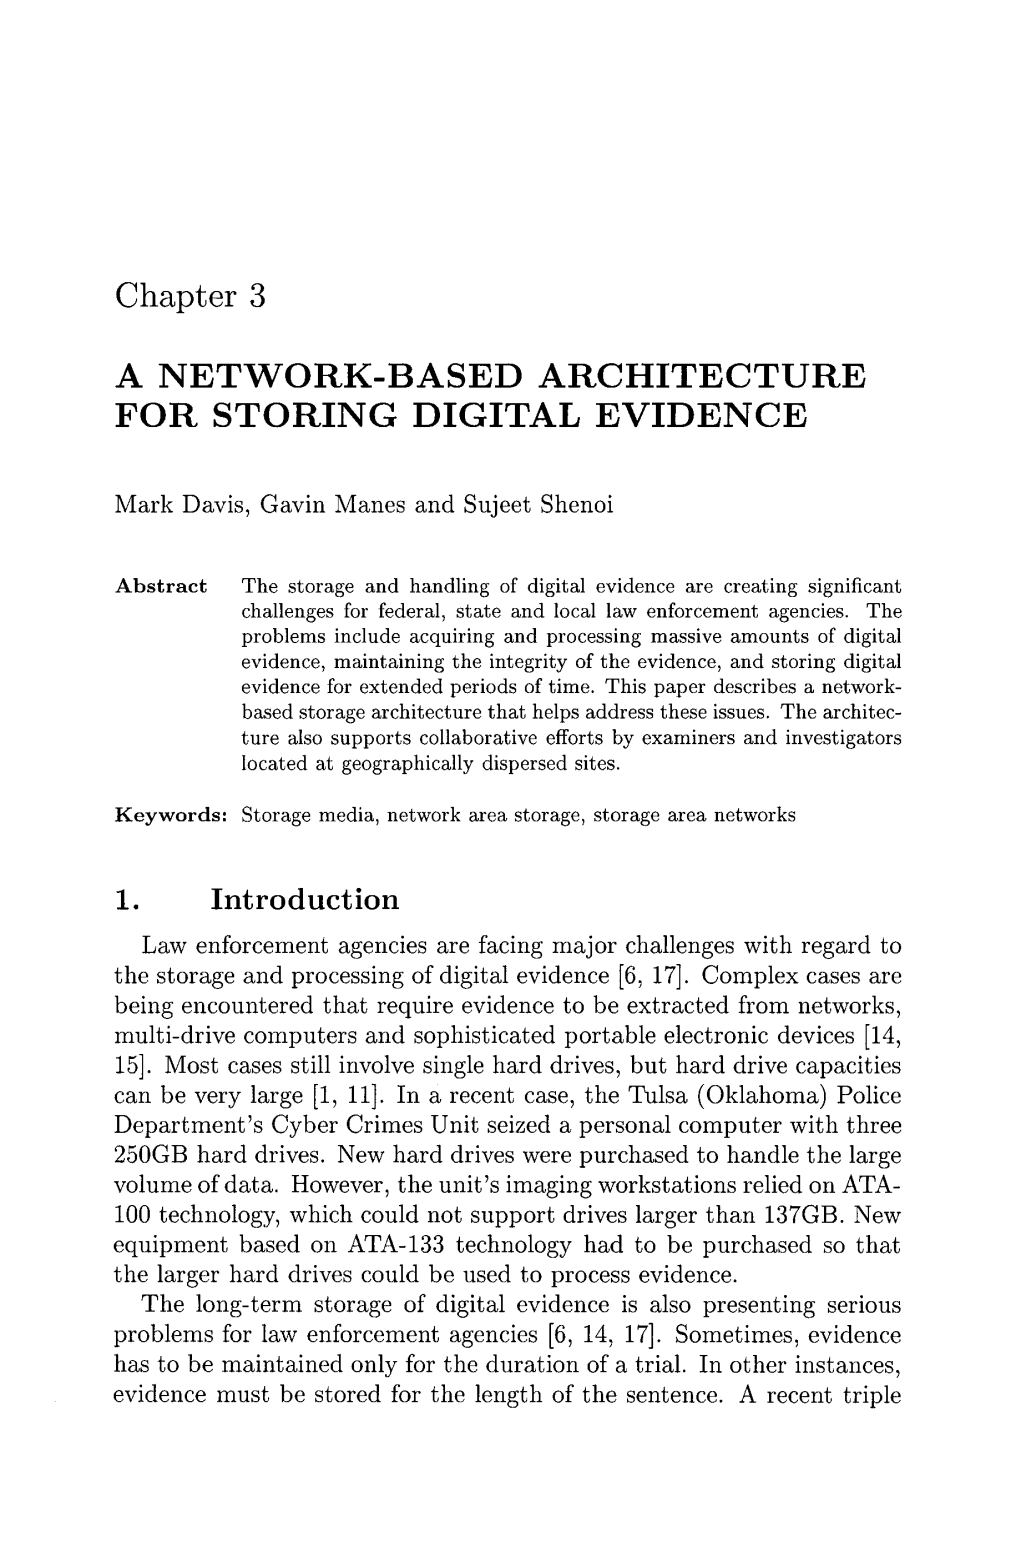 A Network-Based Architecture for Storing Digital Evidence